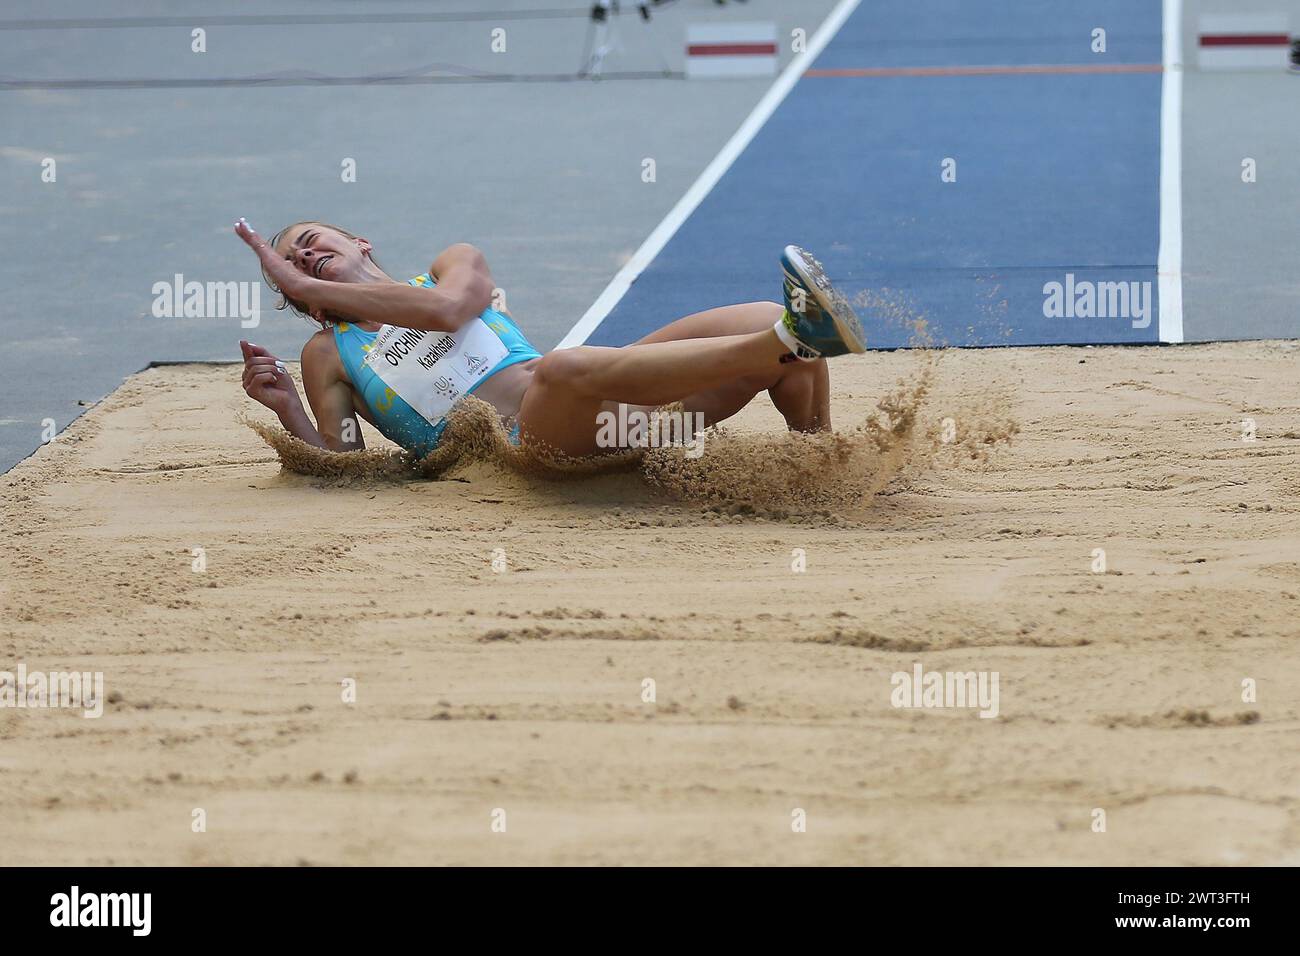 Mariya Ovchinnikova, of Kazakistan, during the final stages of athletics, for the 2019 Universiade, in the specialty of Triple Jump, at San Paolo stad Stock Photo